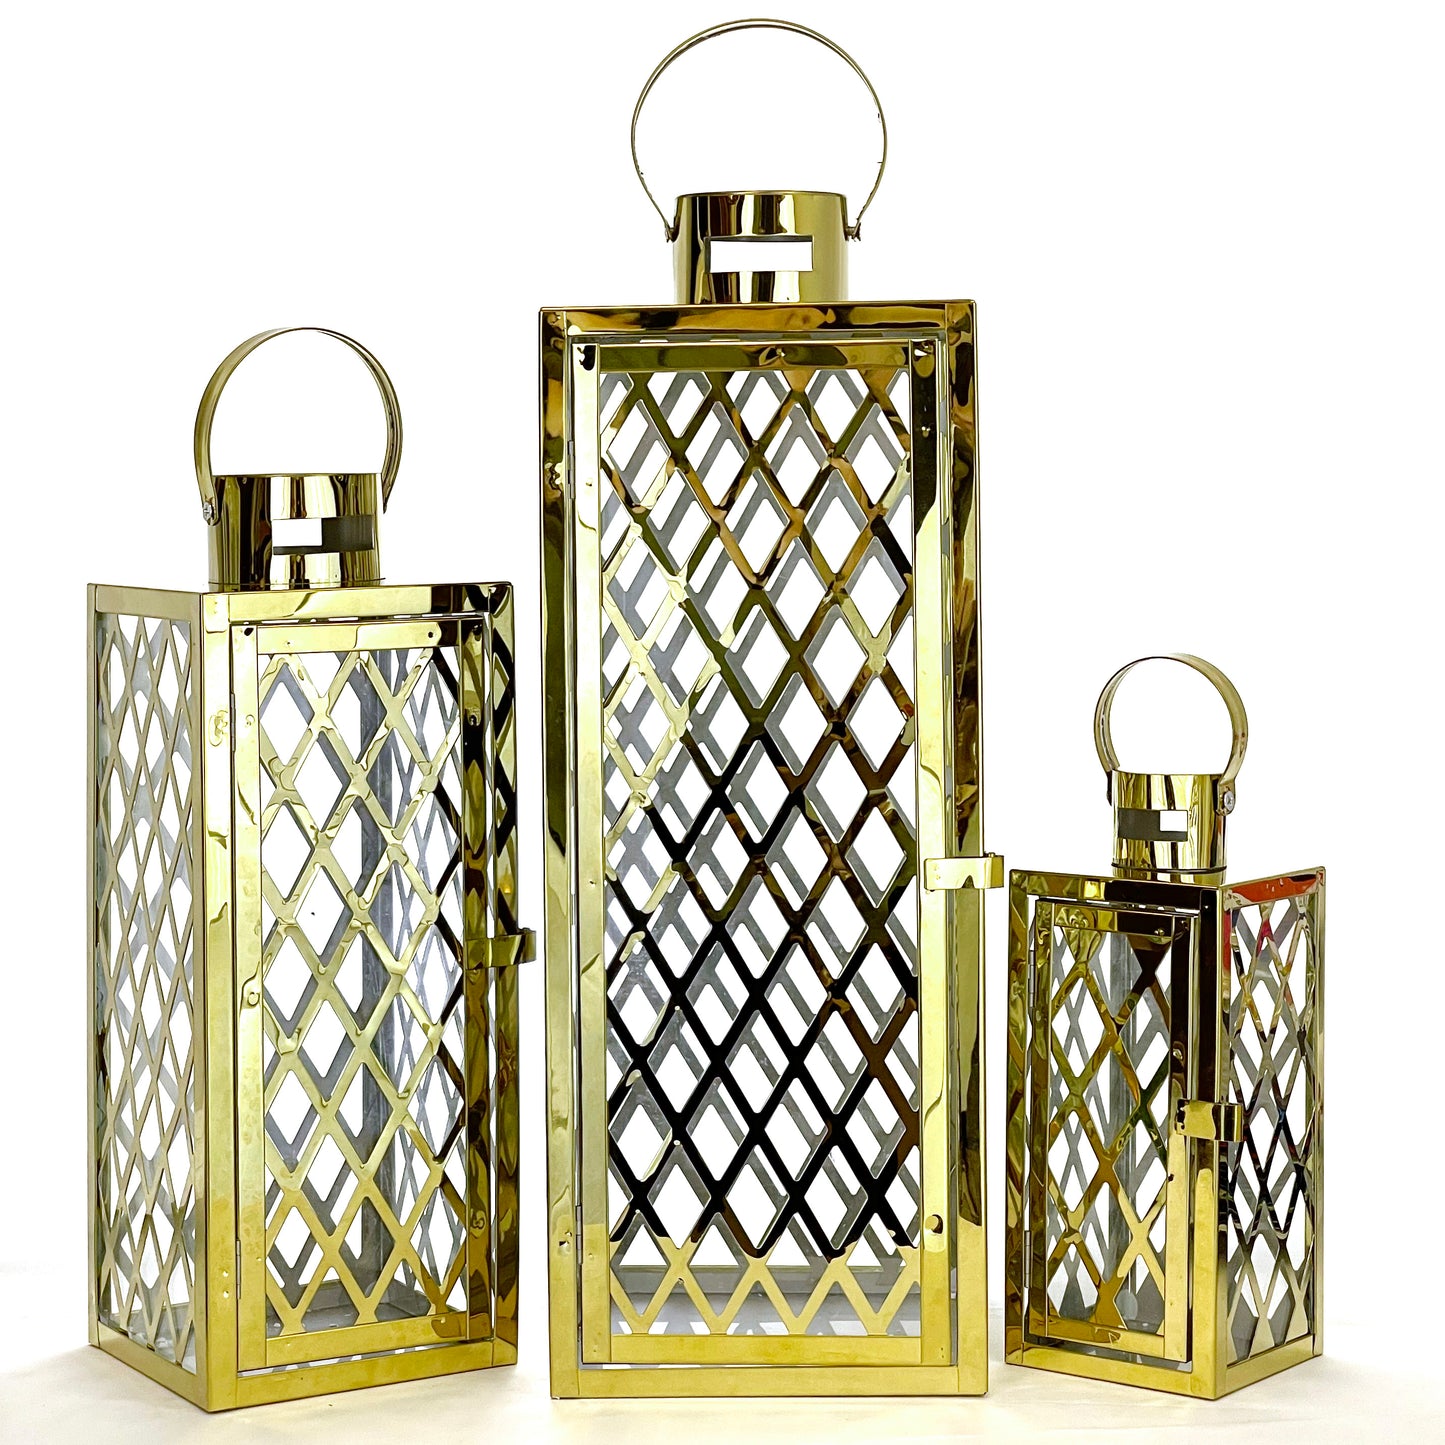 Allgala Lantern Set 3-PC Set Jumbo Luxury Modern Indoor/Outdoor Hurricane Candle Lantern Set with Chrome Plated Structure and Tempered Glass-Diamond Gold-HD88051